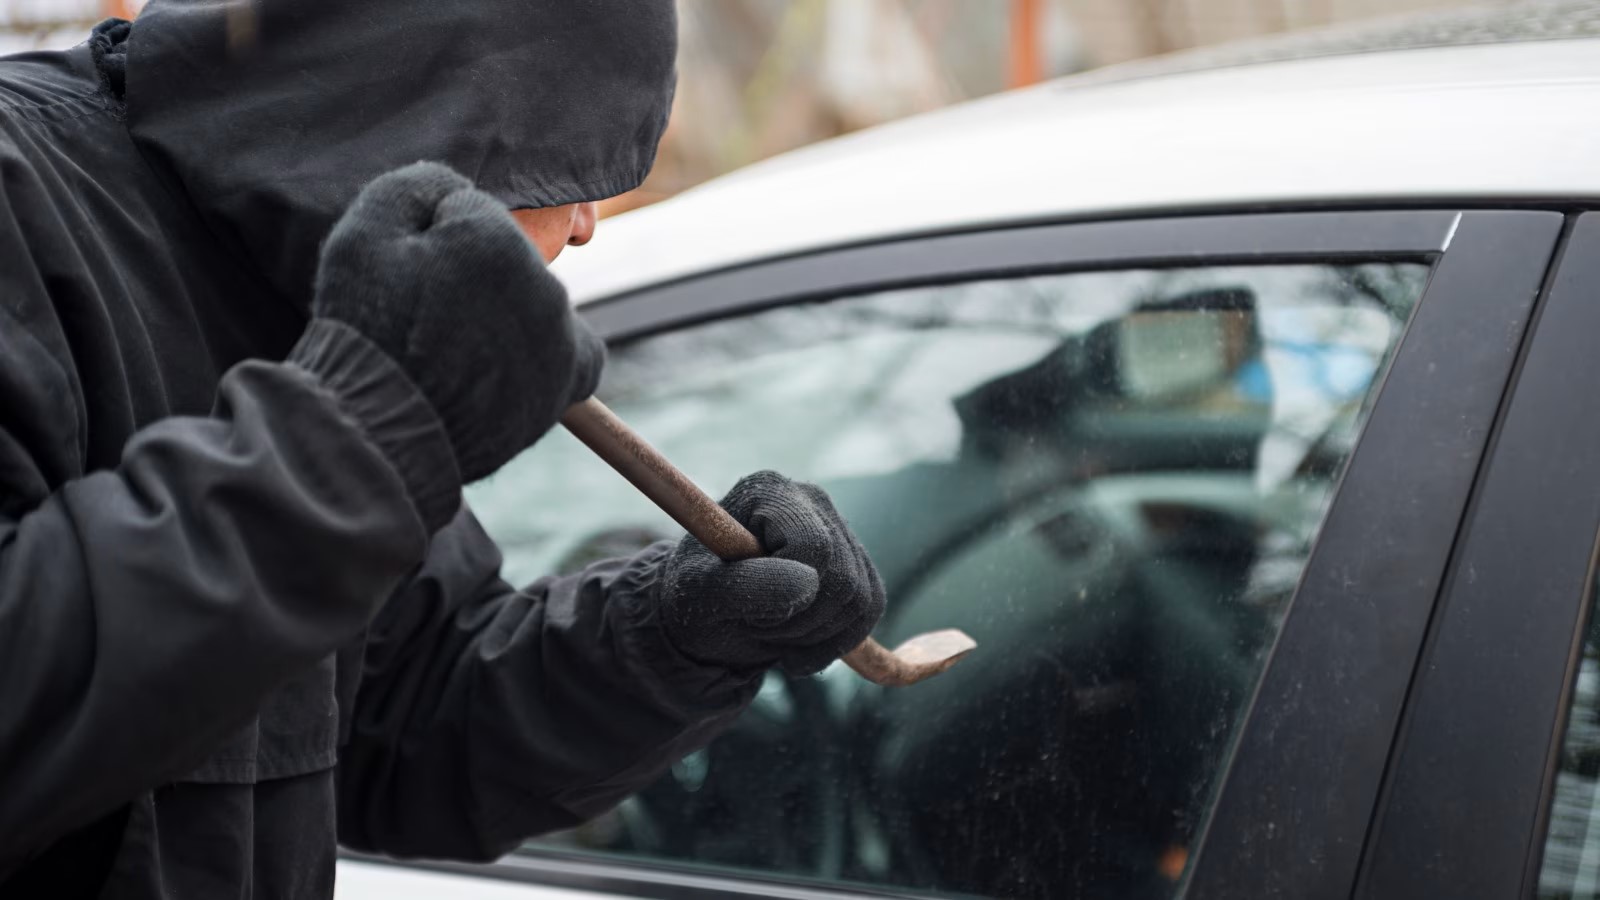 How To Prevent Car Windows From Being Broken Into